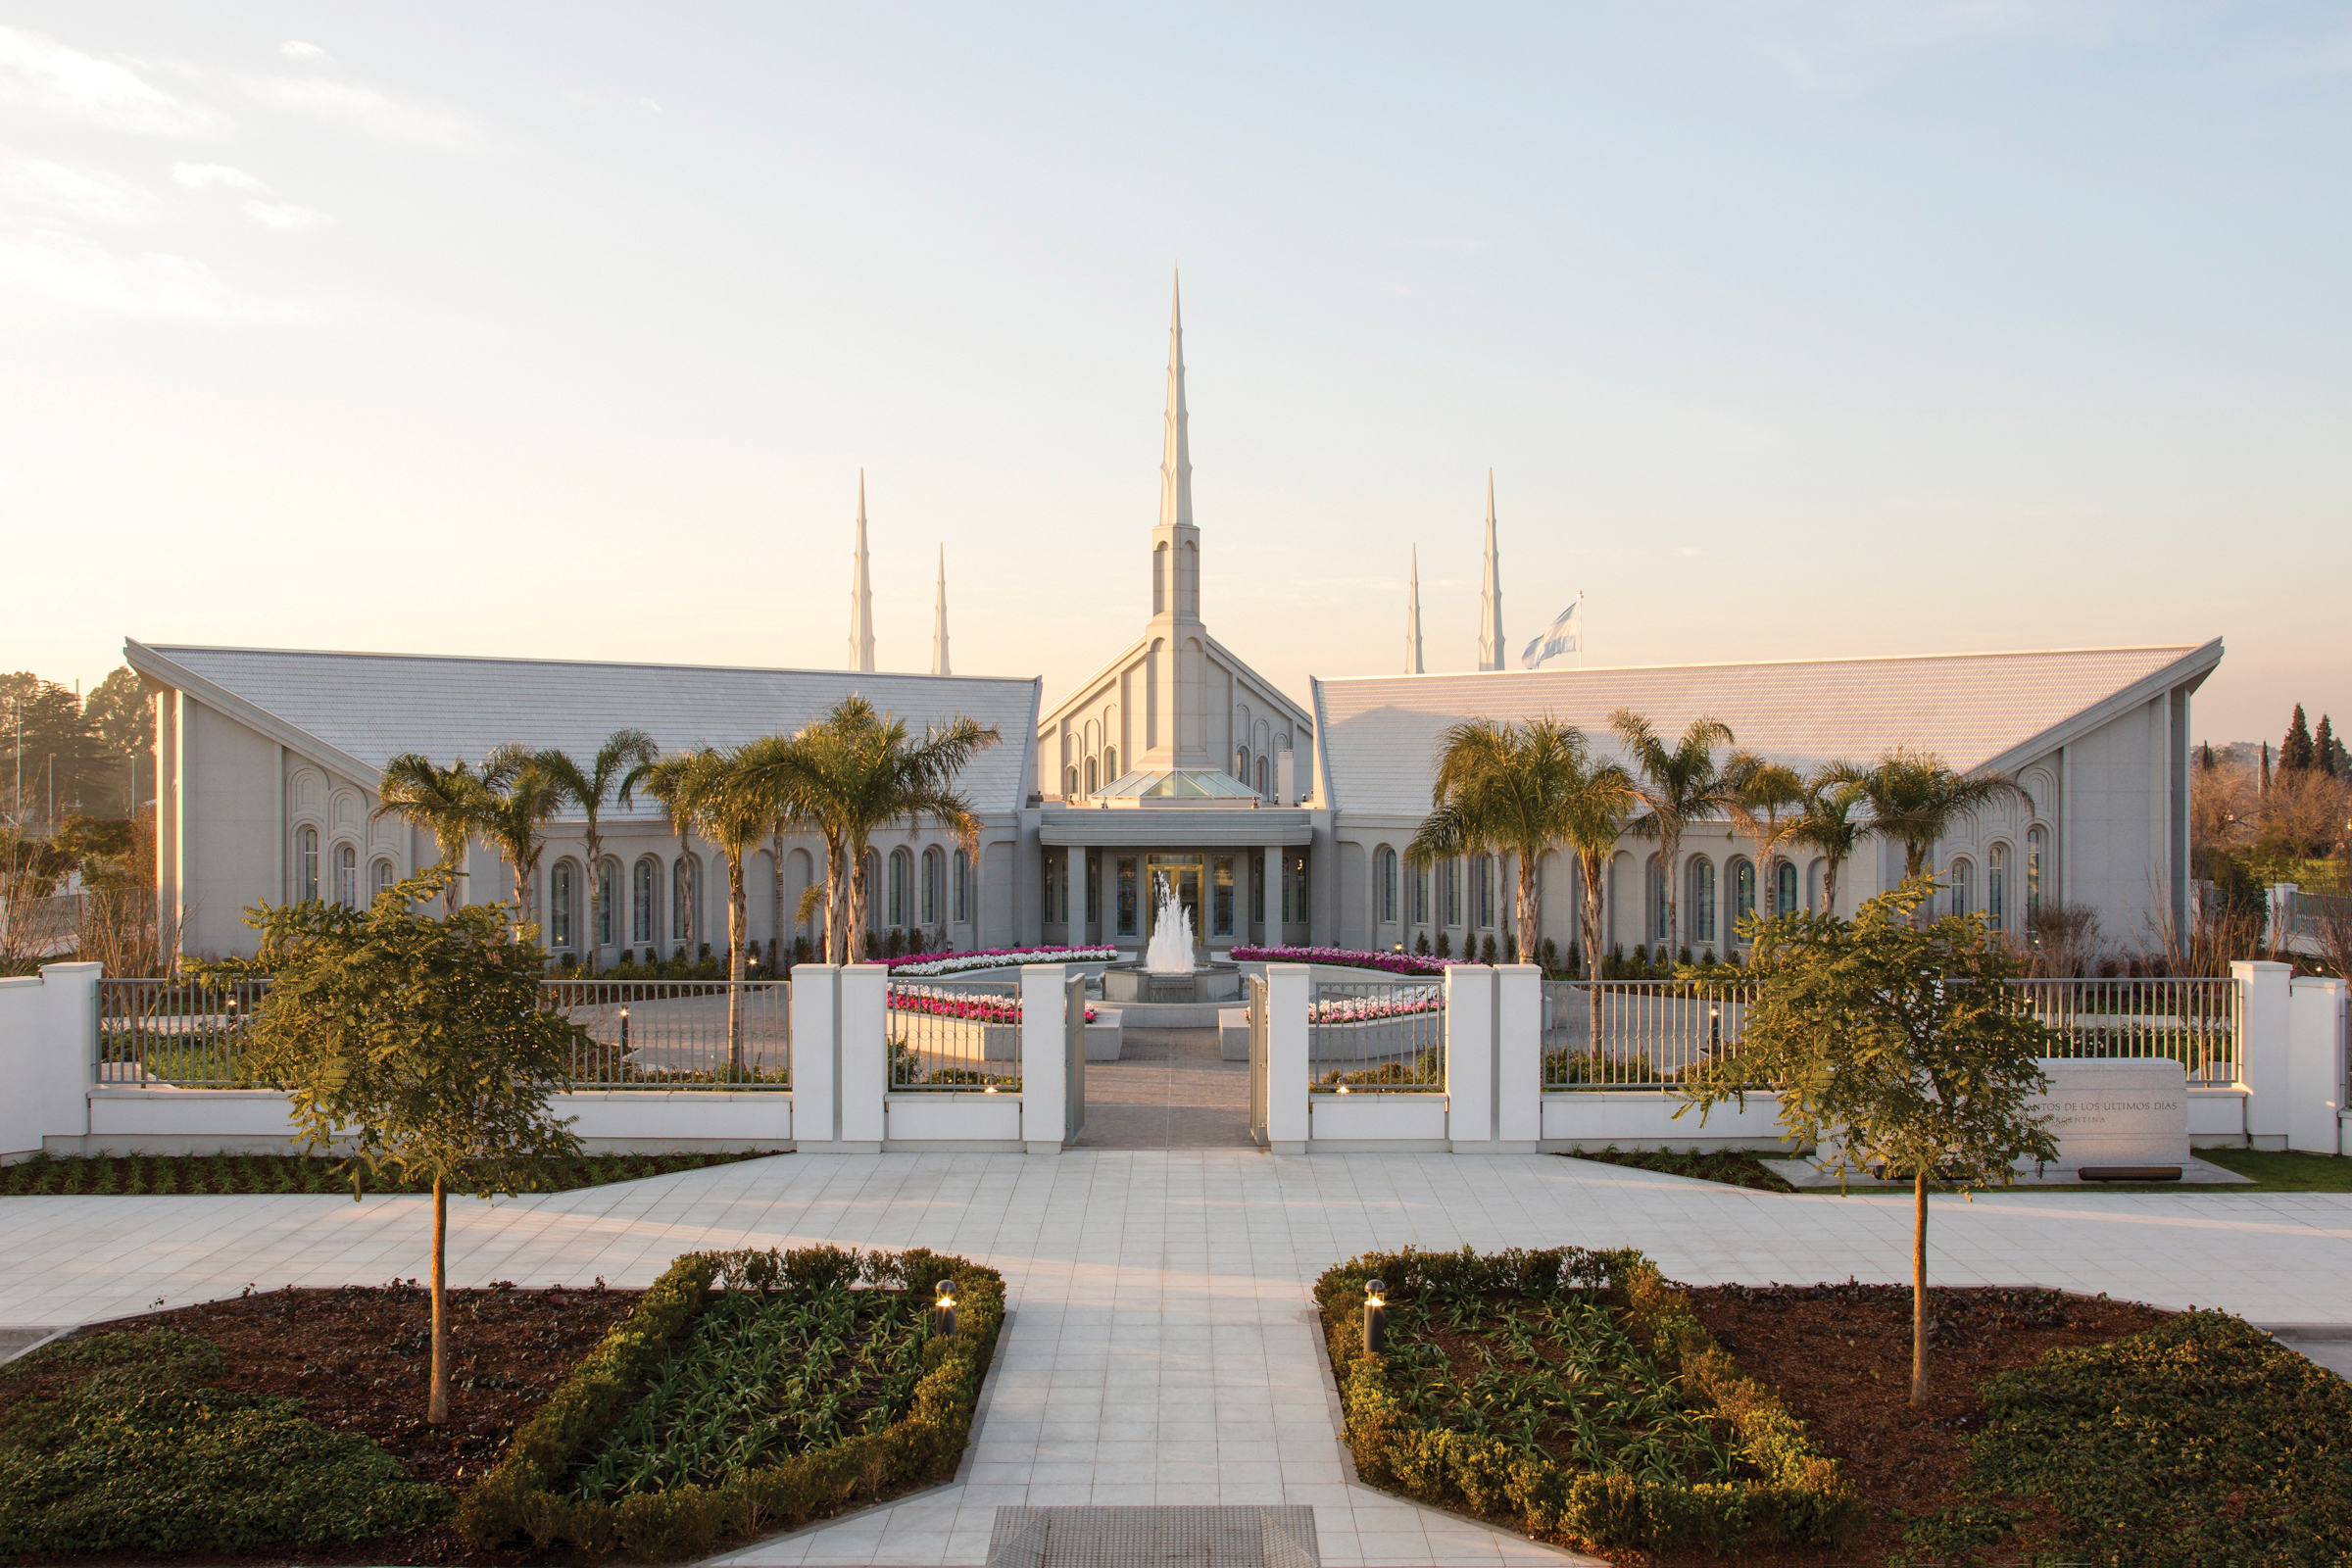 A wide-angle view from afar of the Buenos Aires Argentina Temple in the daylight, with trees and a water fountain.